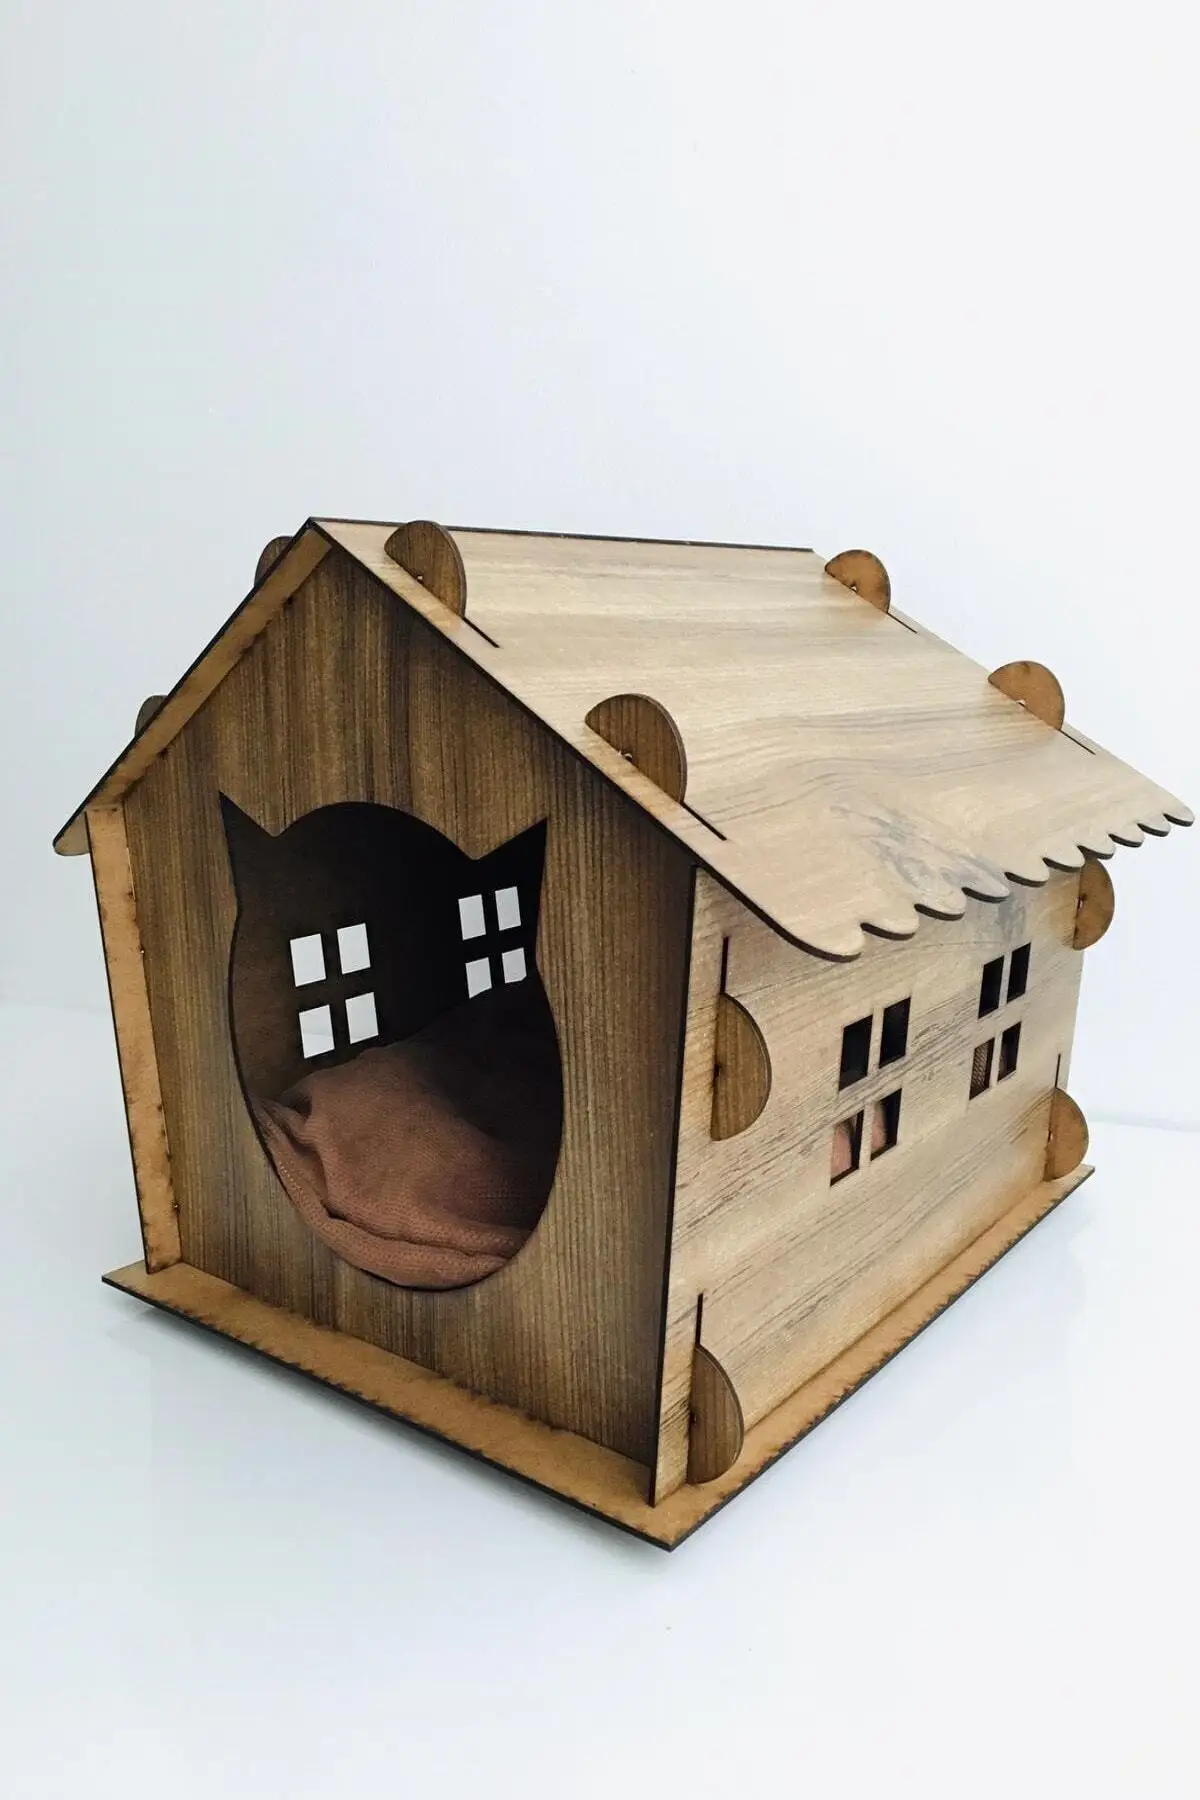 Wooden Cat House Decorative Cat Slot Cat Bed Cat House Cat Play Areas-Roofed Houses for Cats Playground Hot toy